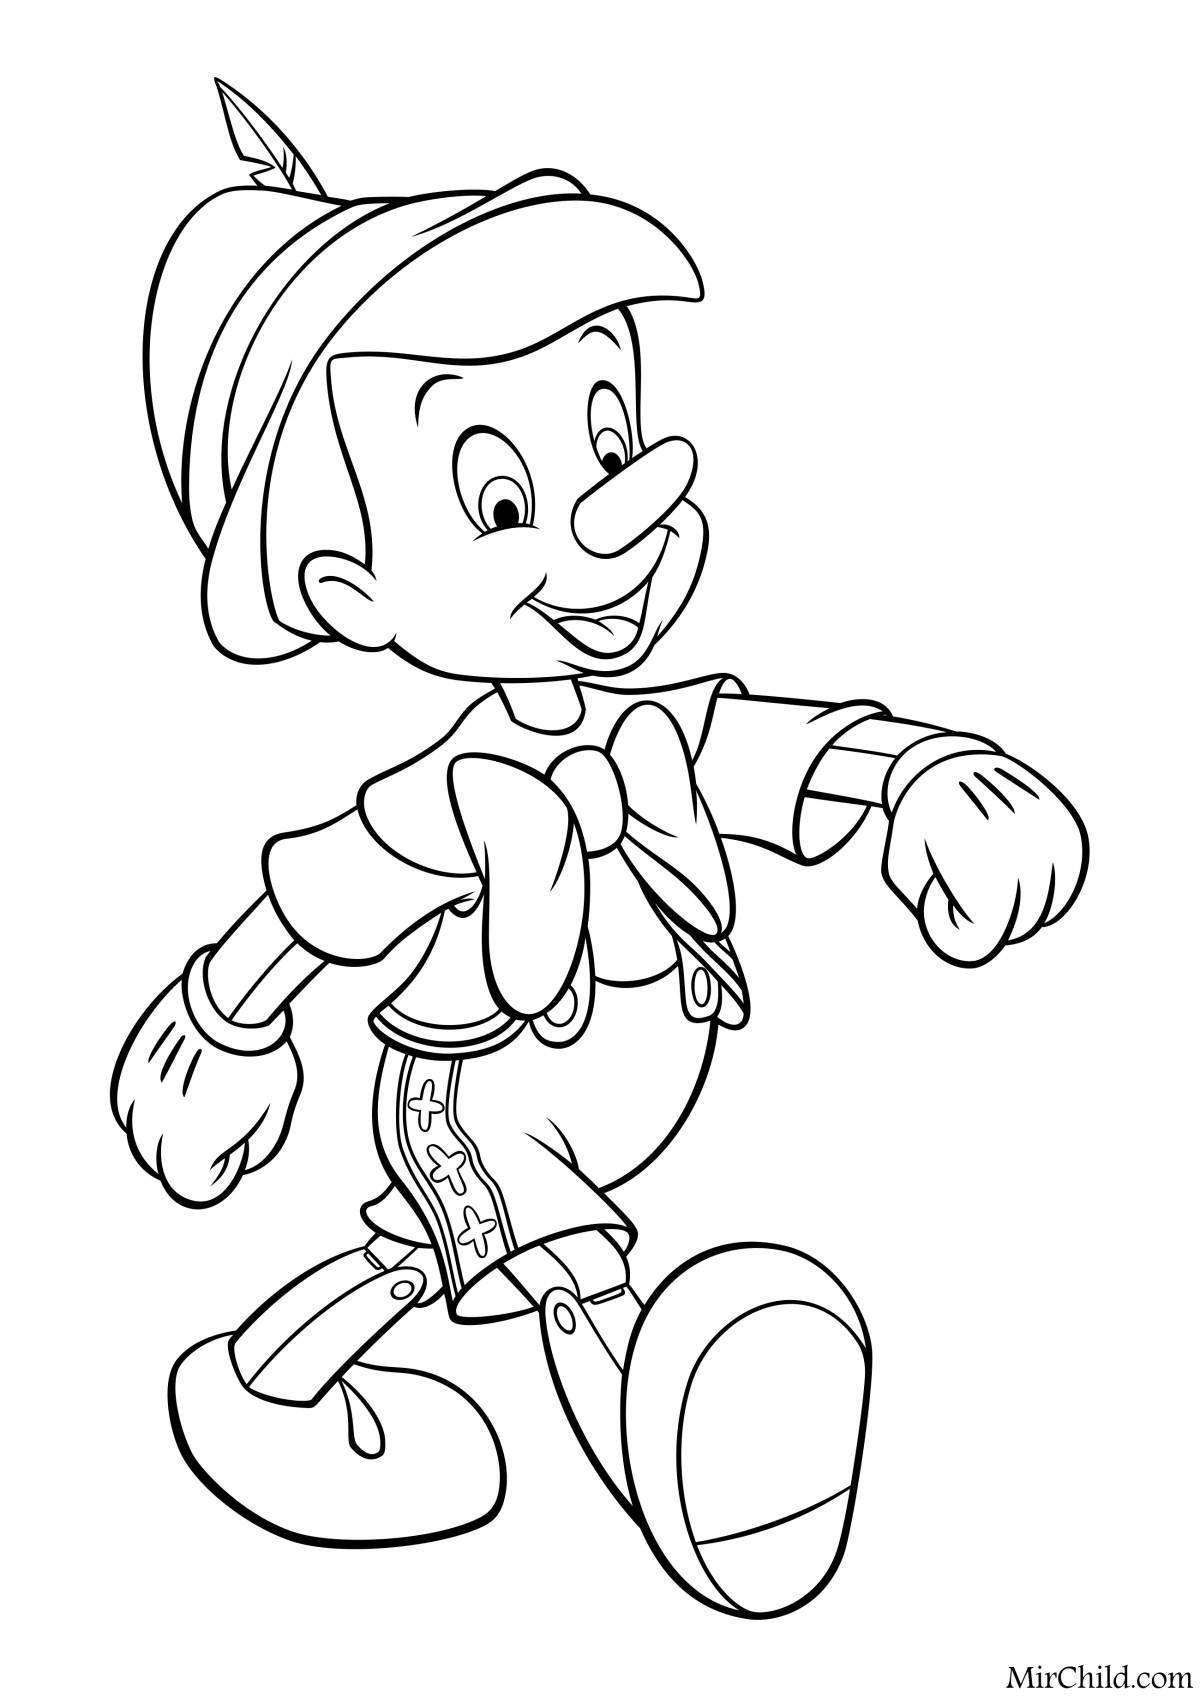 Coloring page funny pinocchio